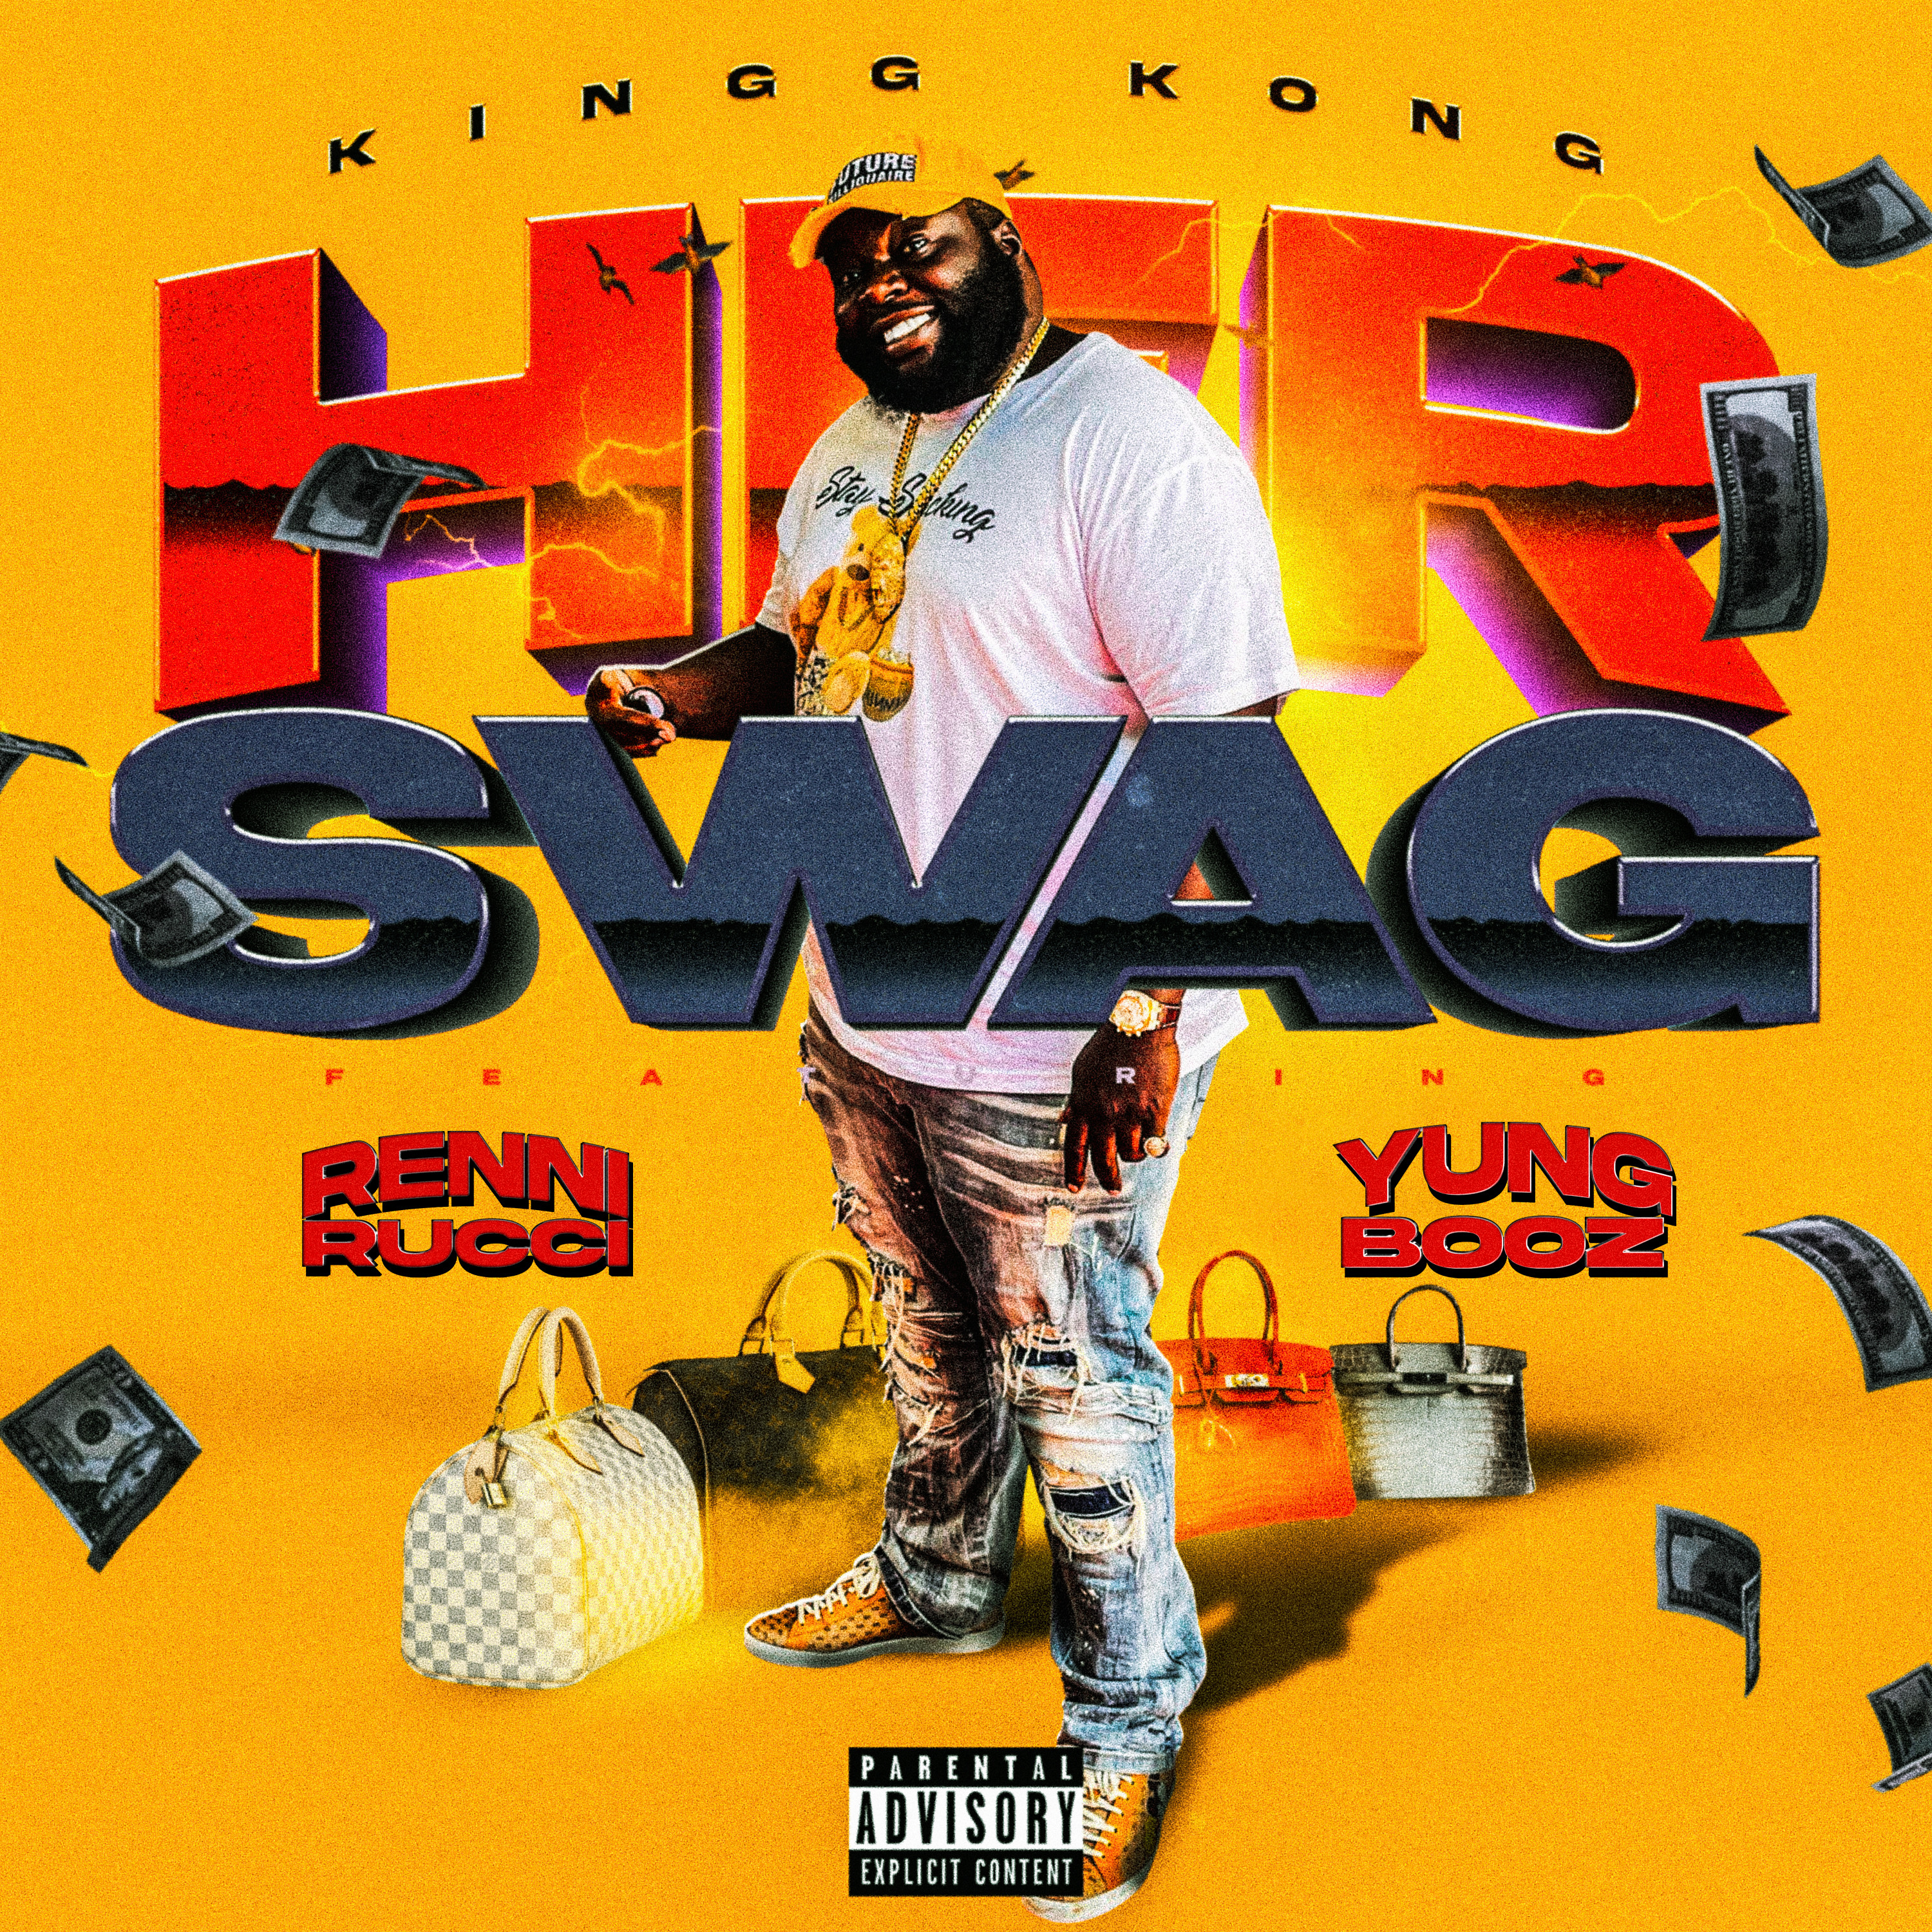 Art for HER SWAG by KINGG KONG